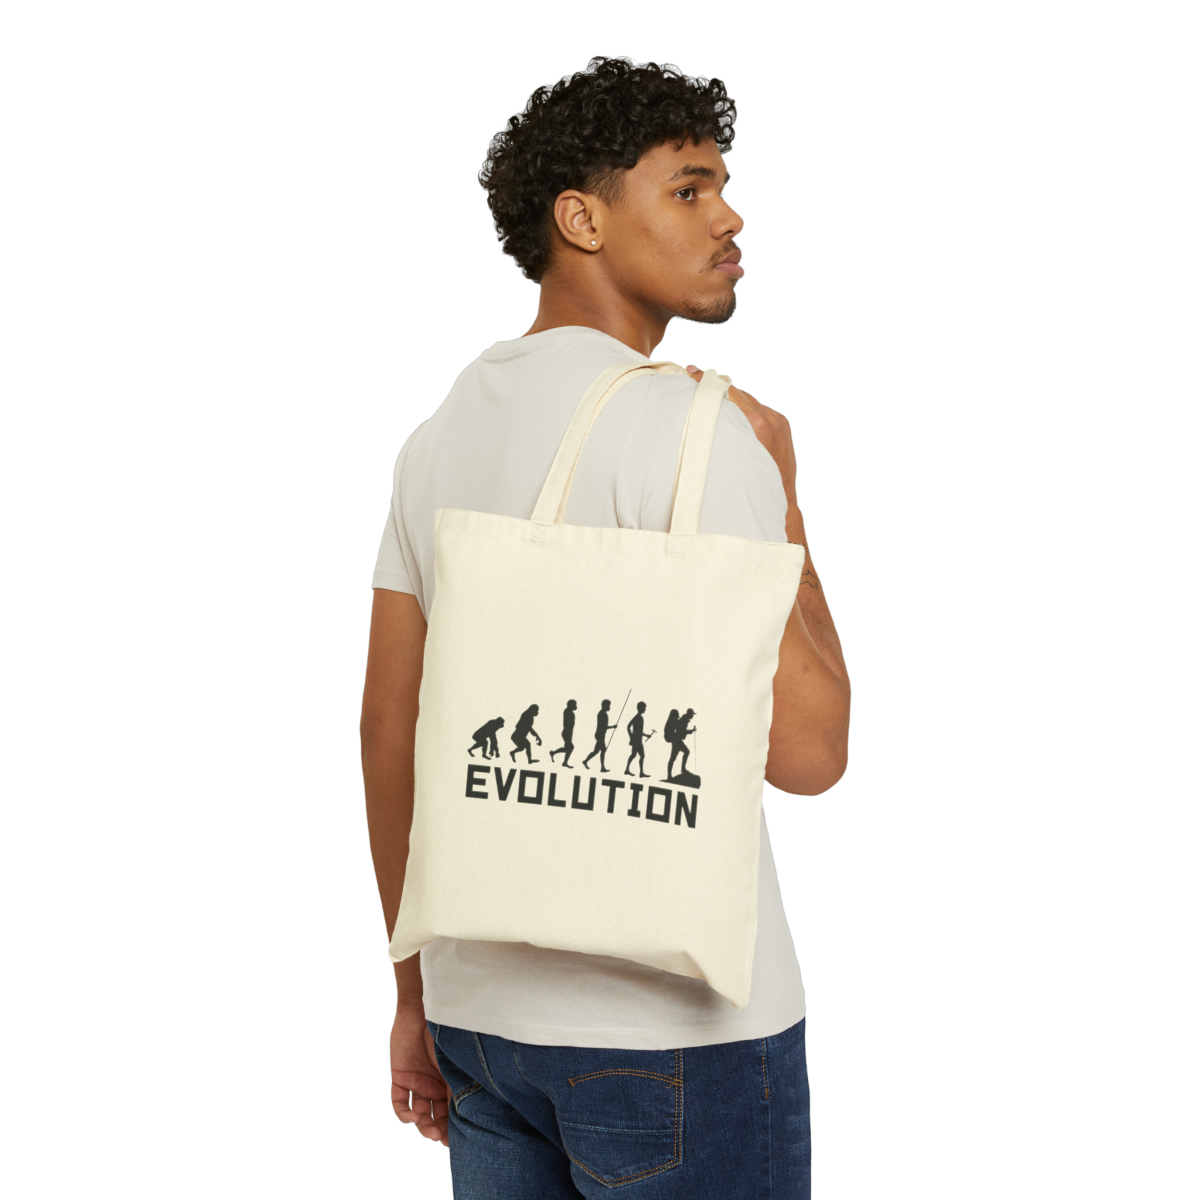 100% Cotton Canvas Tote Bag - Durable, with 20" Handles - Eco-Friendly - $16.48